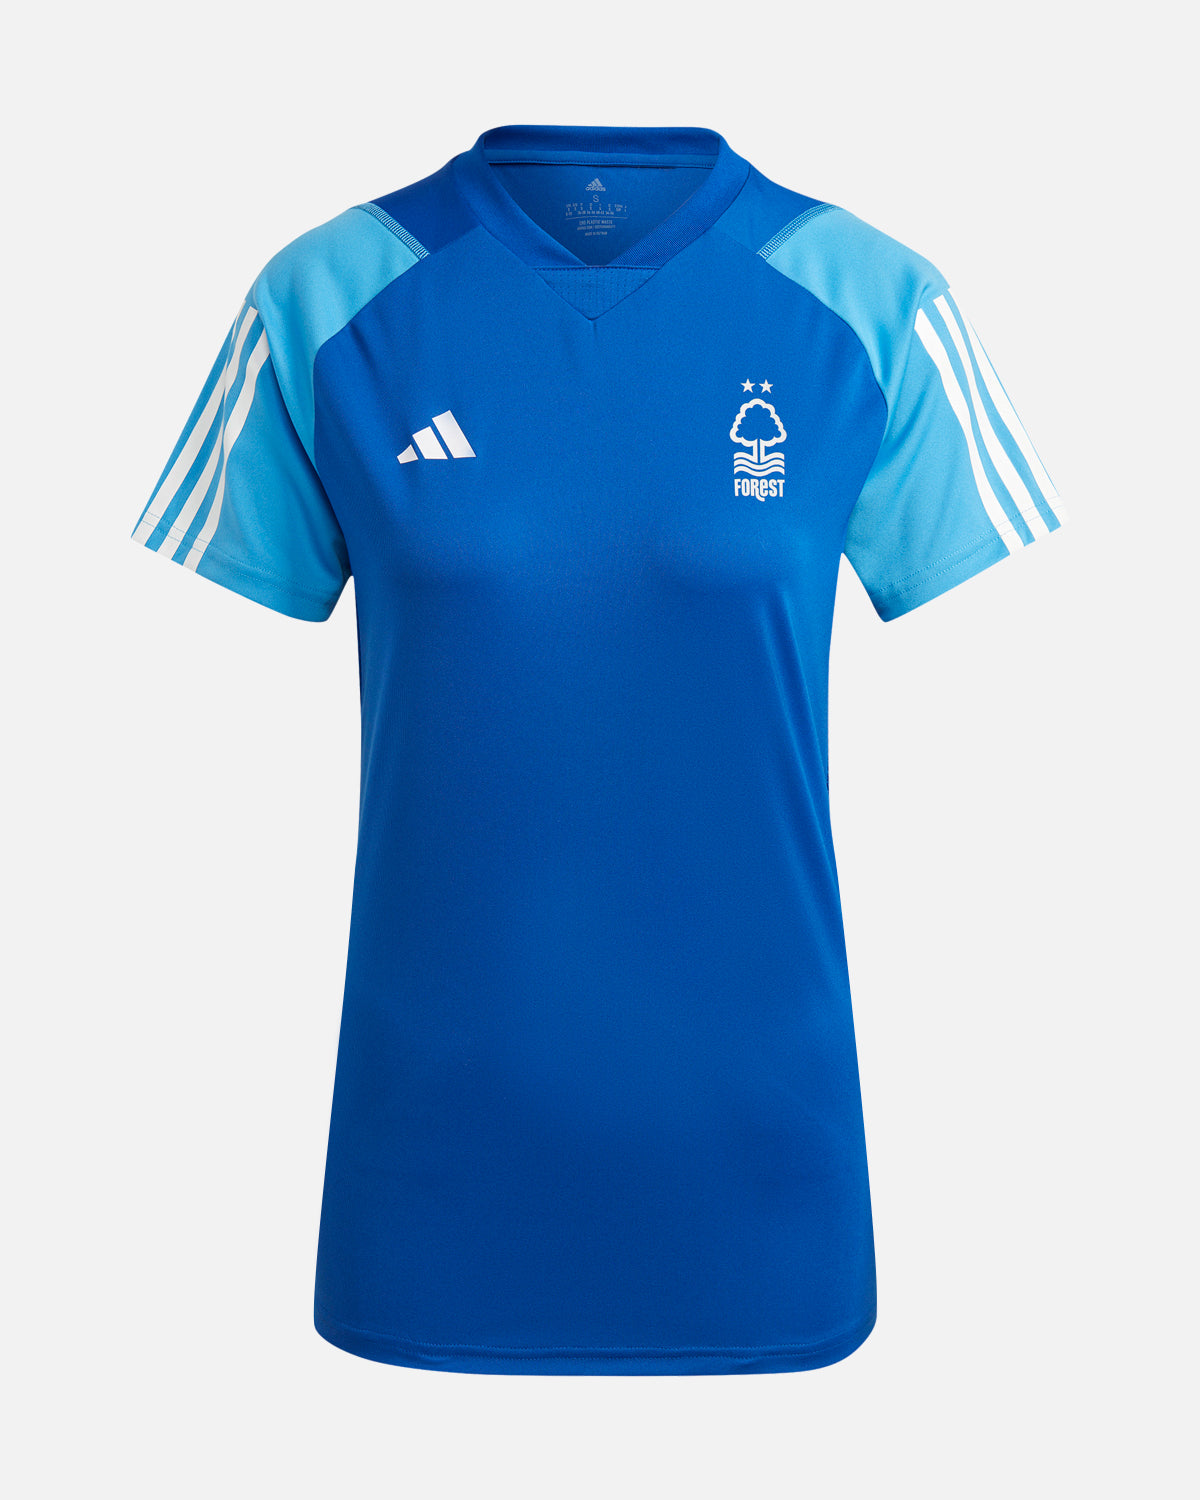 NFFC Women's Royal Travel Jersey 23-24